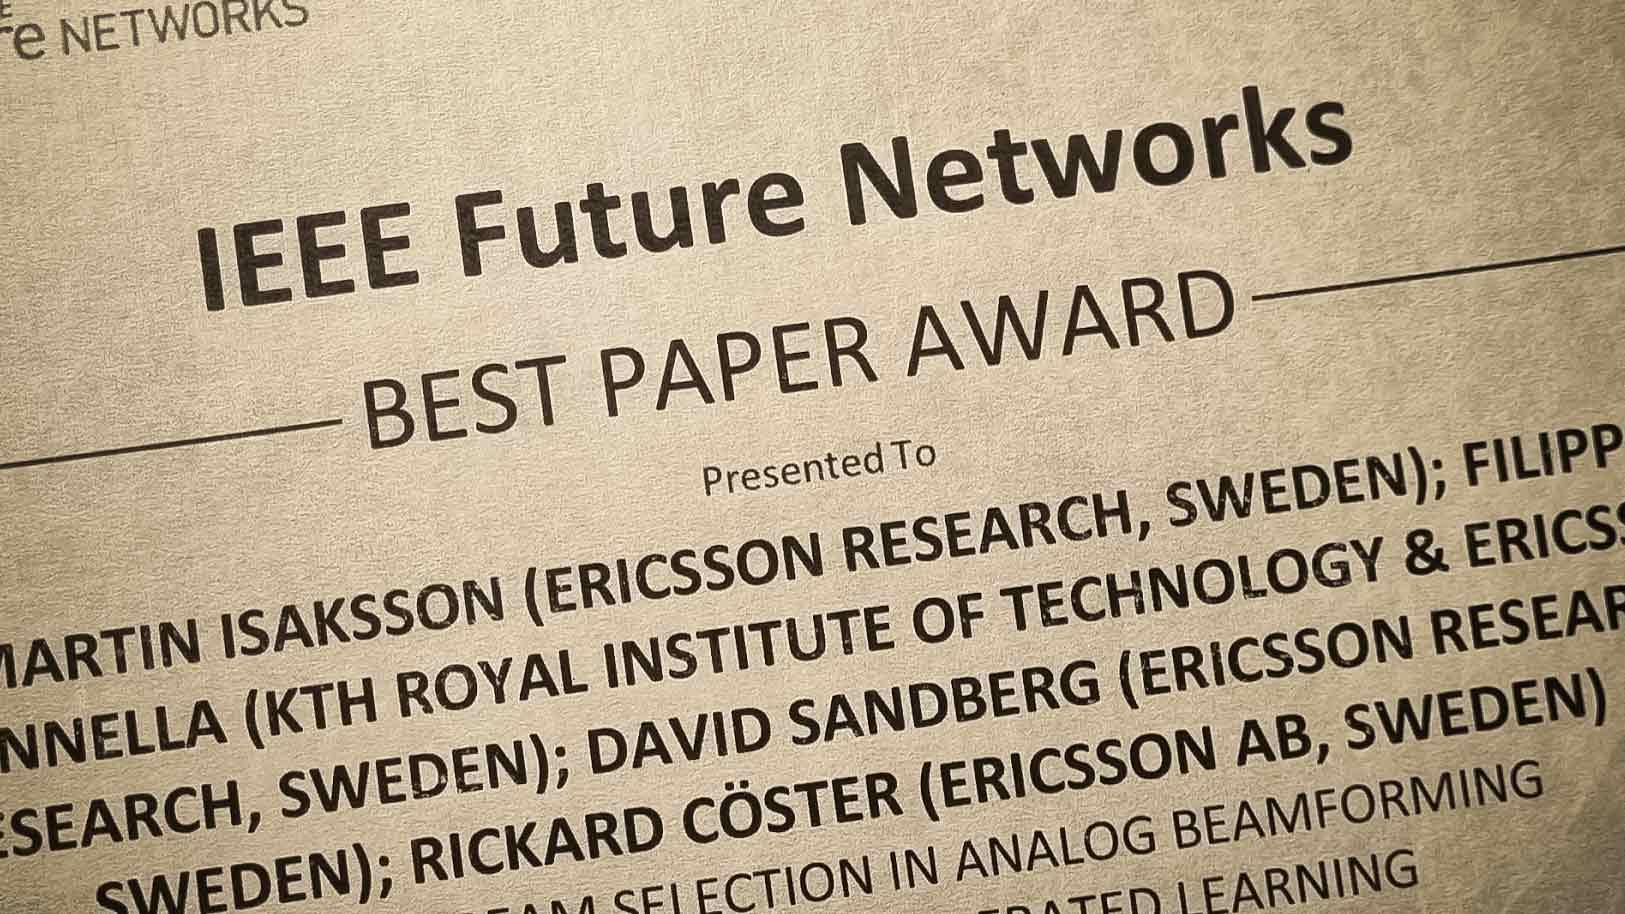 Best Paper Award at the IEEE FNWF 2023.